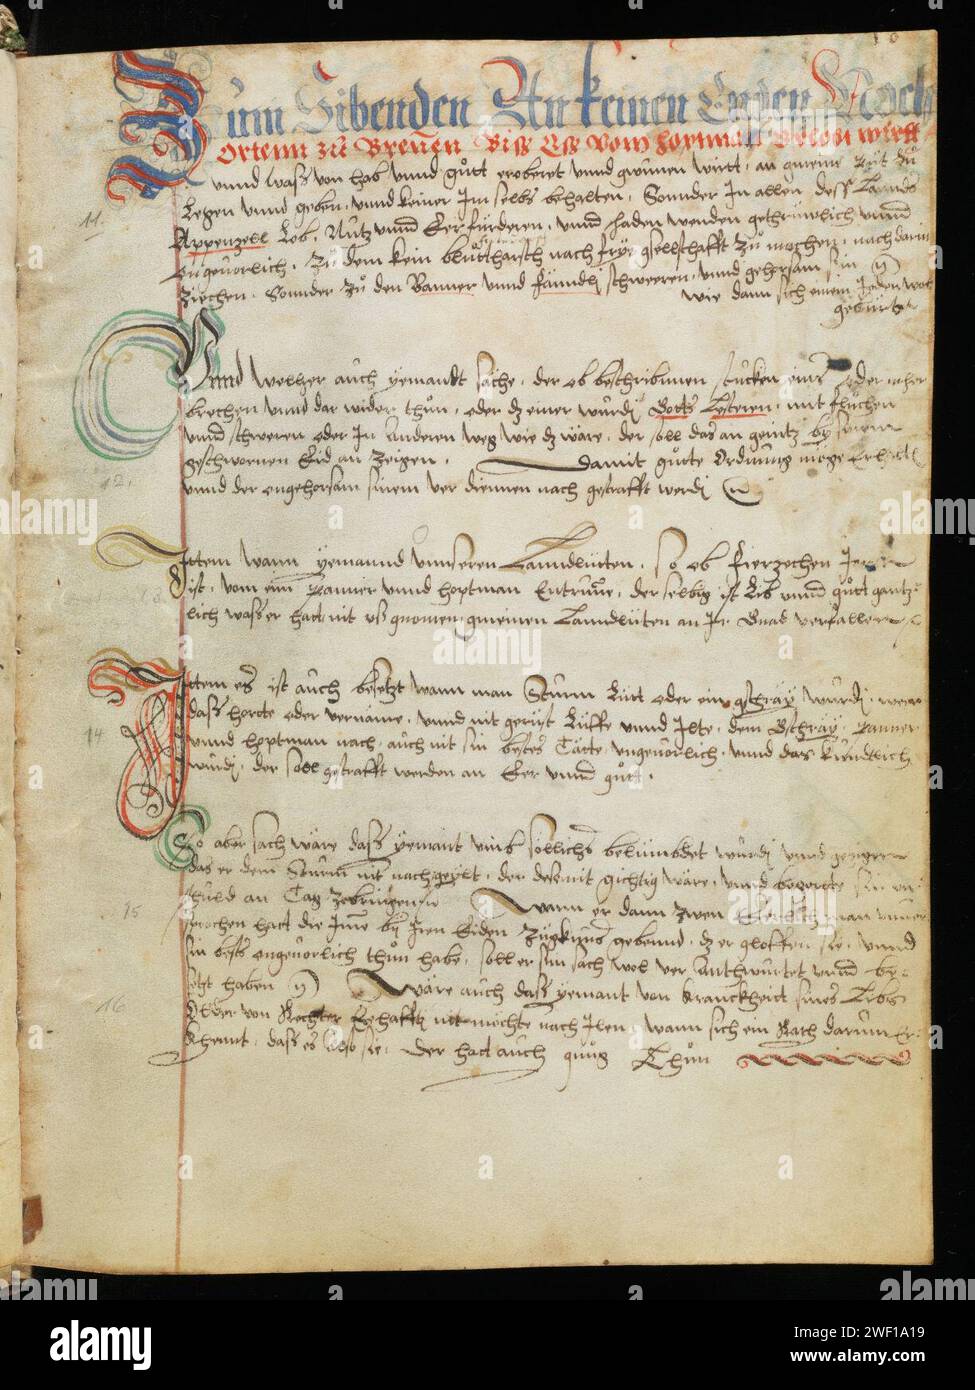 Appenzell, Landesarchiv Appenzell Innerrhoden, E.10.02.01.01, f. 10r – Silver Book of the Land. Stock Photo